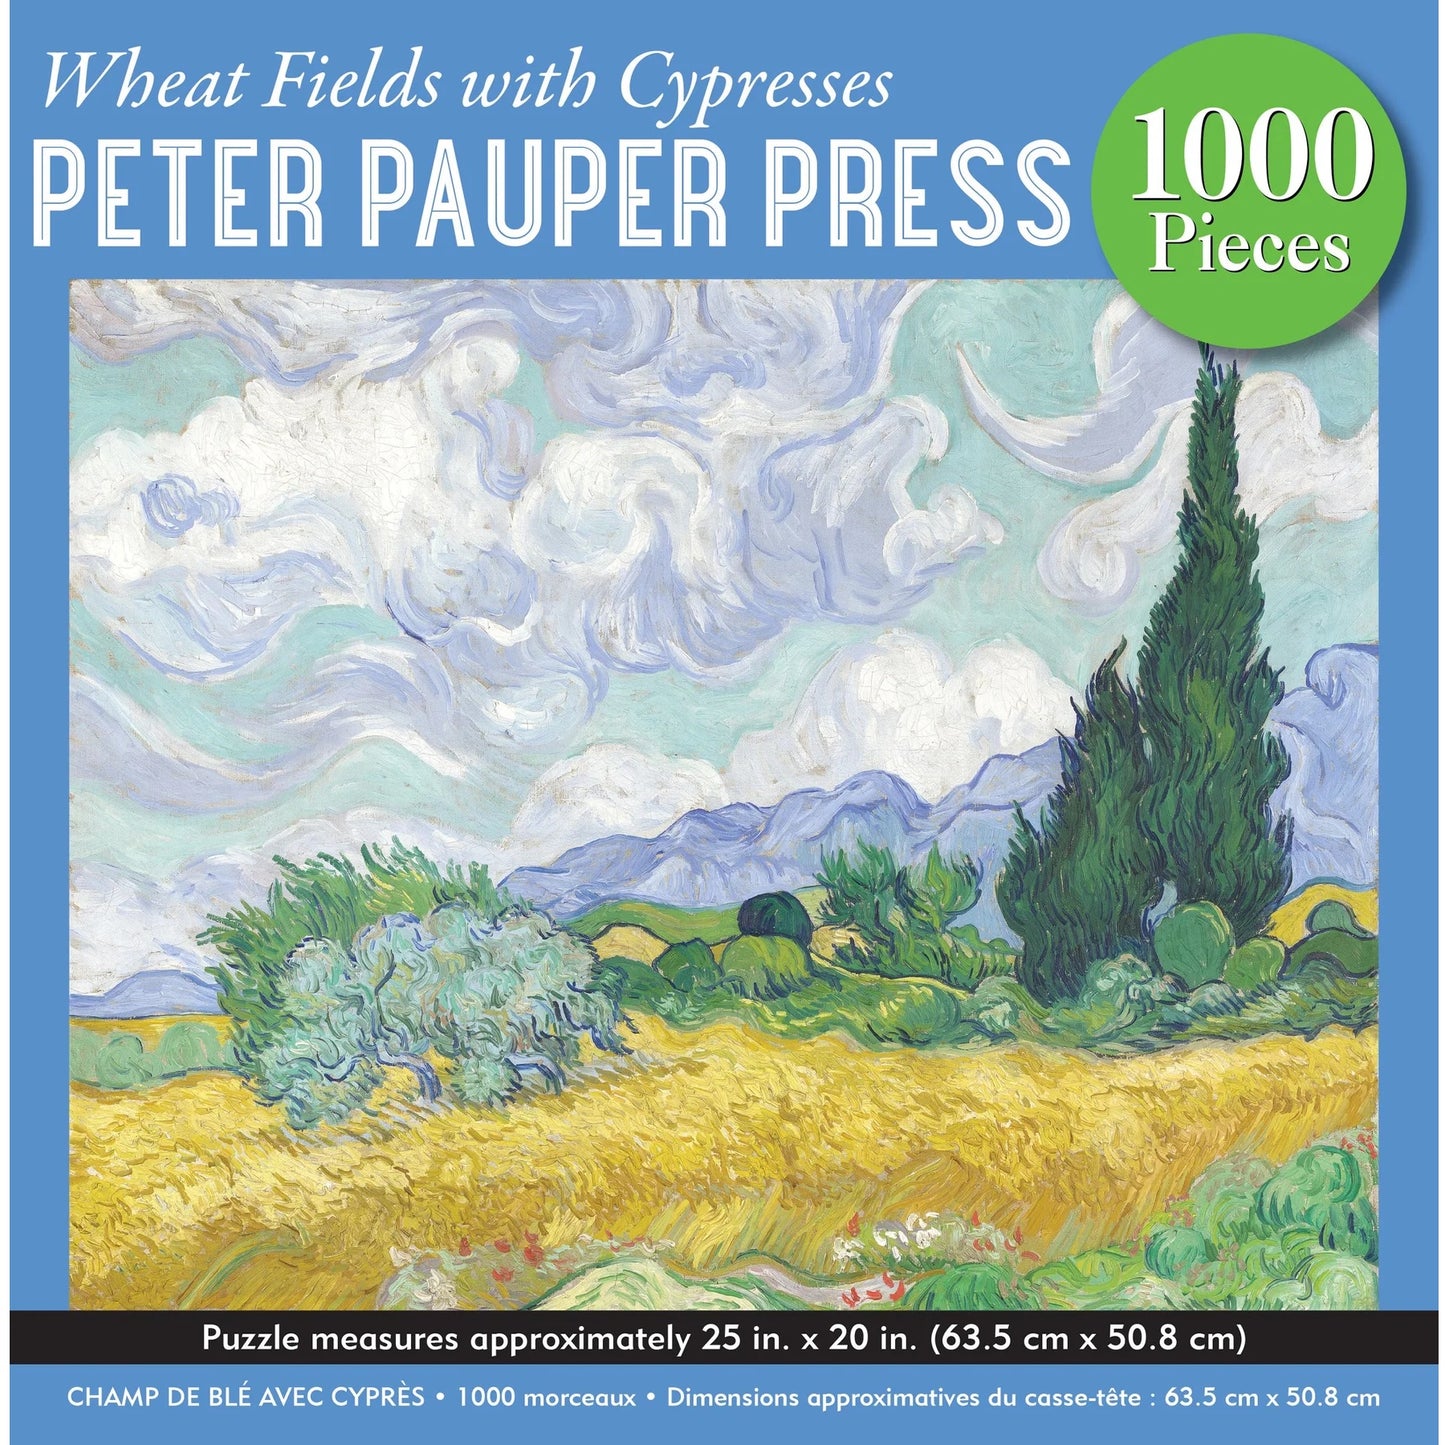 PPP Puzzle Wheat Fields with Cypresses 1000pc